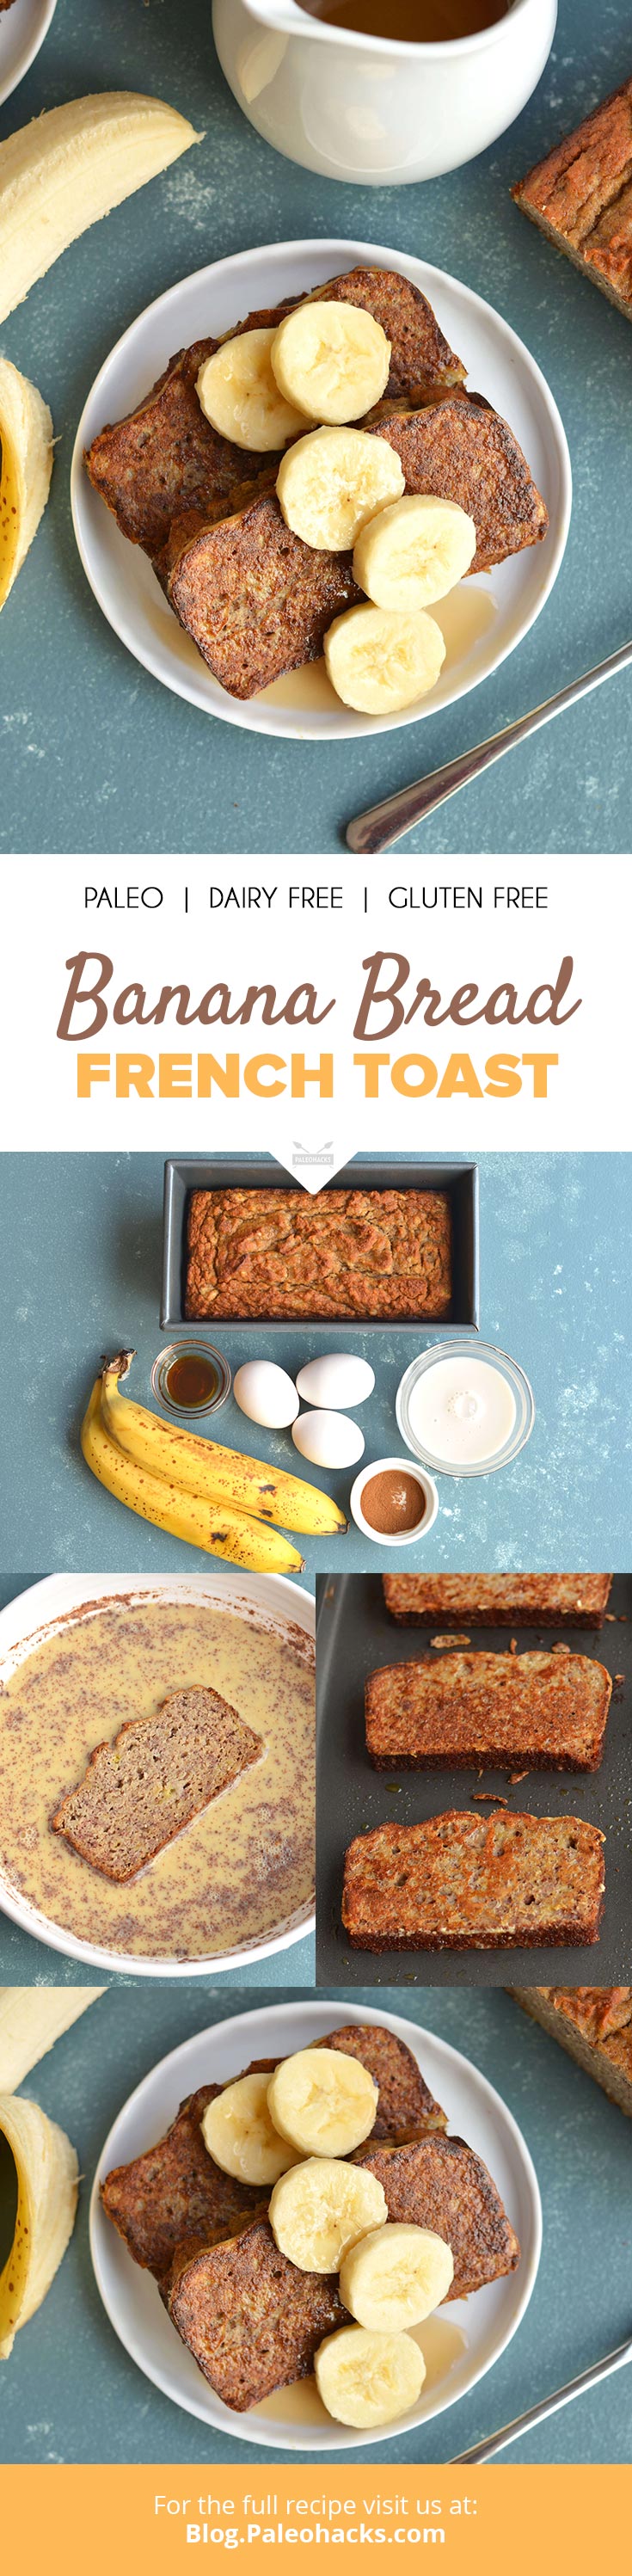 Sweet & bursting with fall flavors, this Banana Bread French Toast is perfect for Saturday mornings! If you’re looking for Paleo breakfast food, this is it!